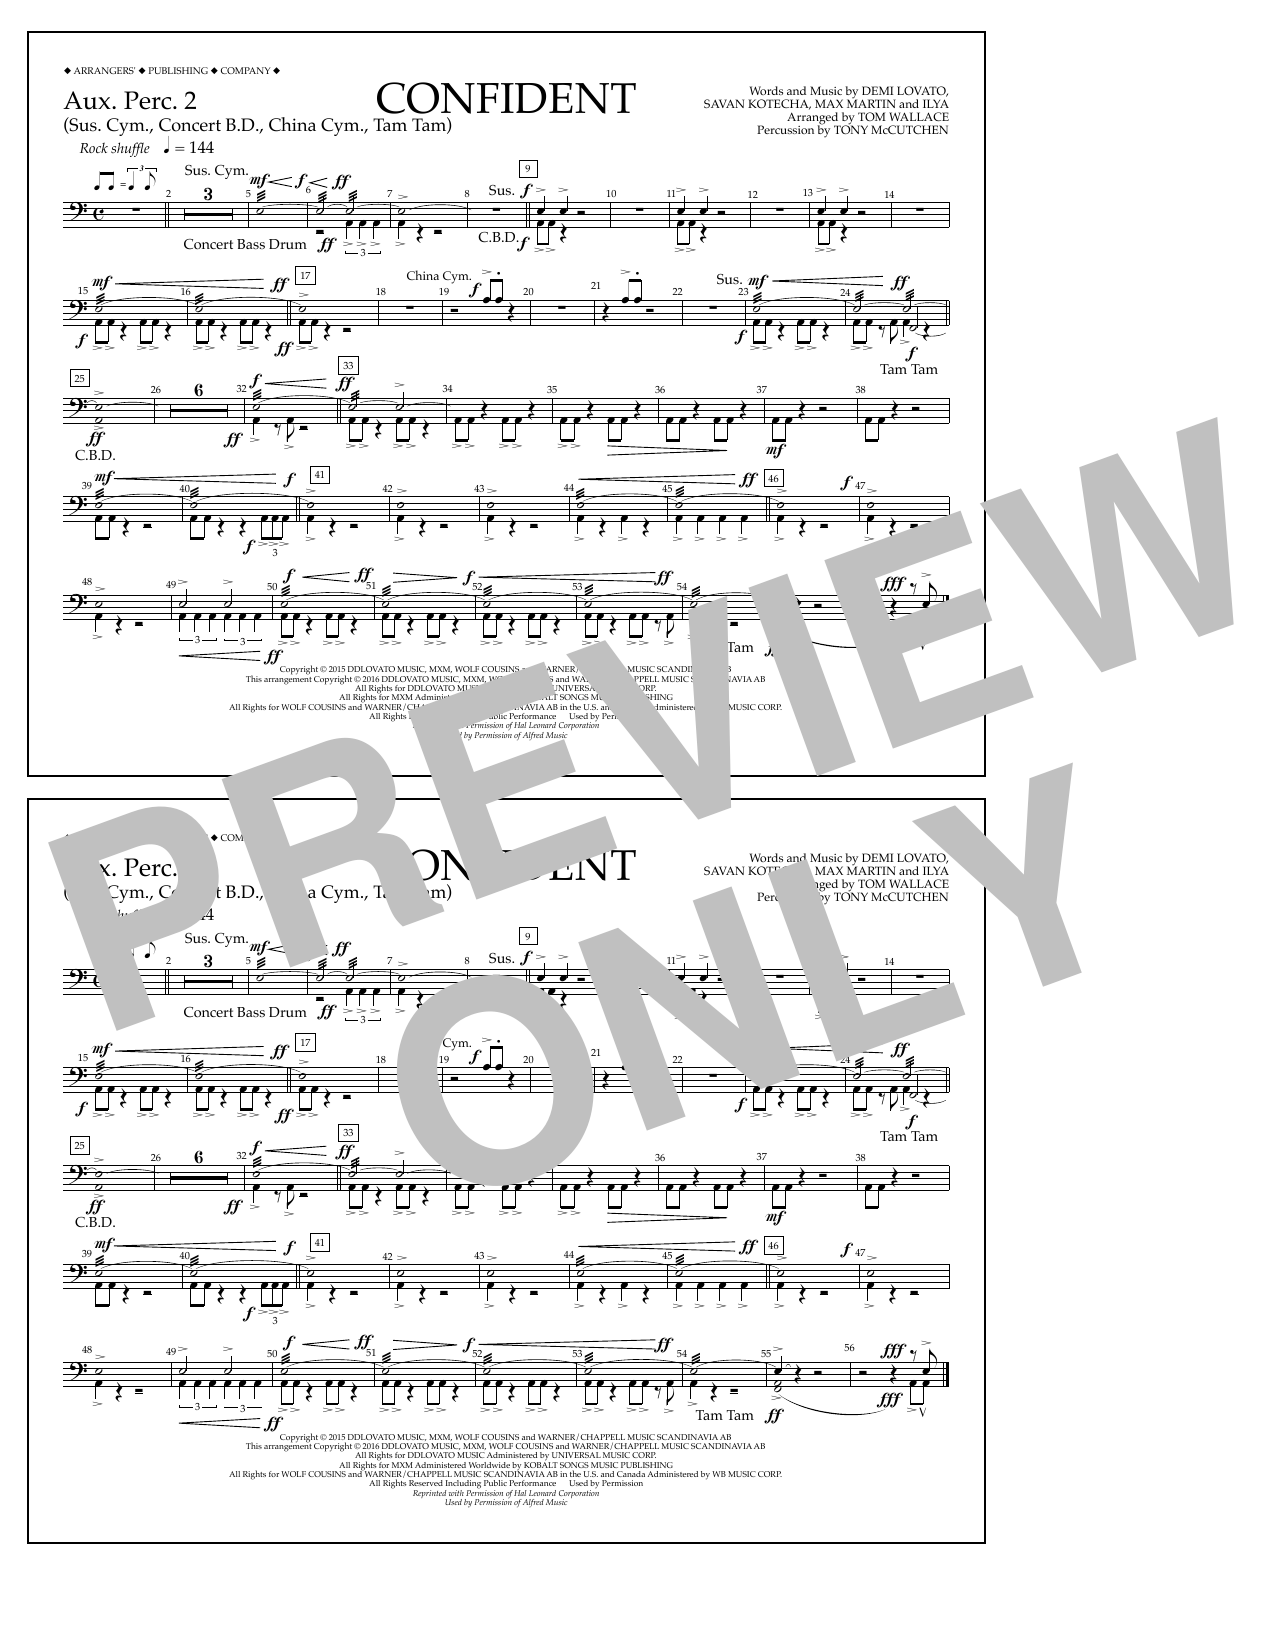 Download Tom Wallace Confident - Aux. Perc. 2 Sheet Music